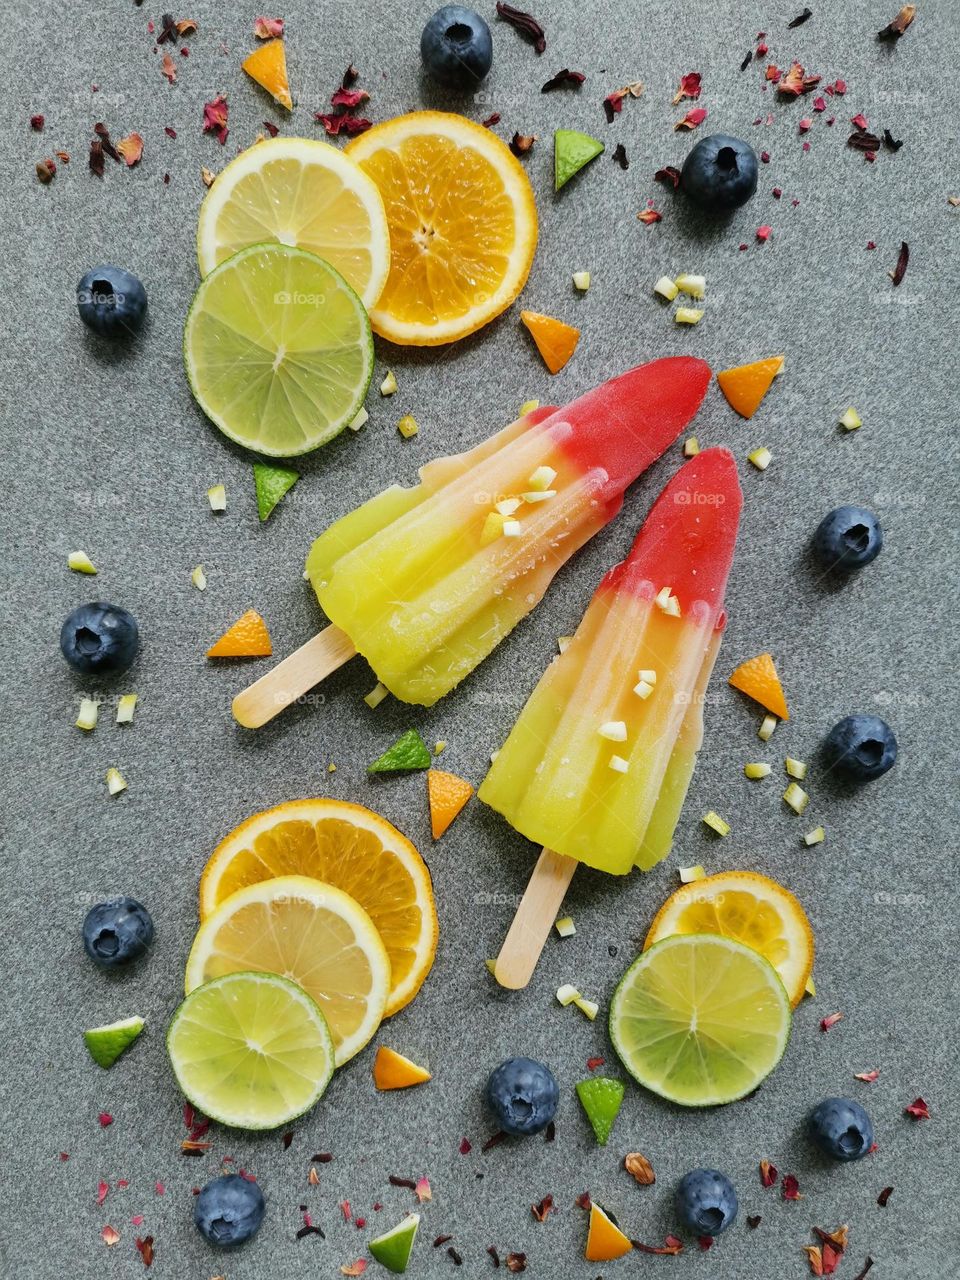 Summer treats, summer mood, summer time. Delicious and juicy ice lollies and fruits. Iced juice. Good choice for hot summer days. Refreshing snacks. 